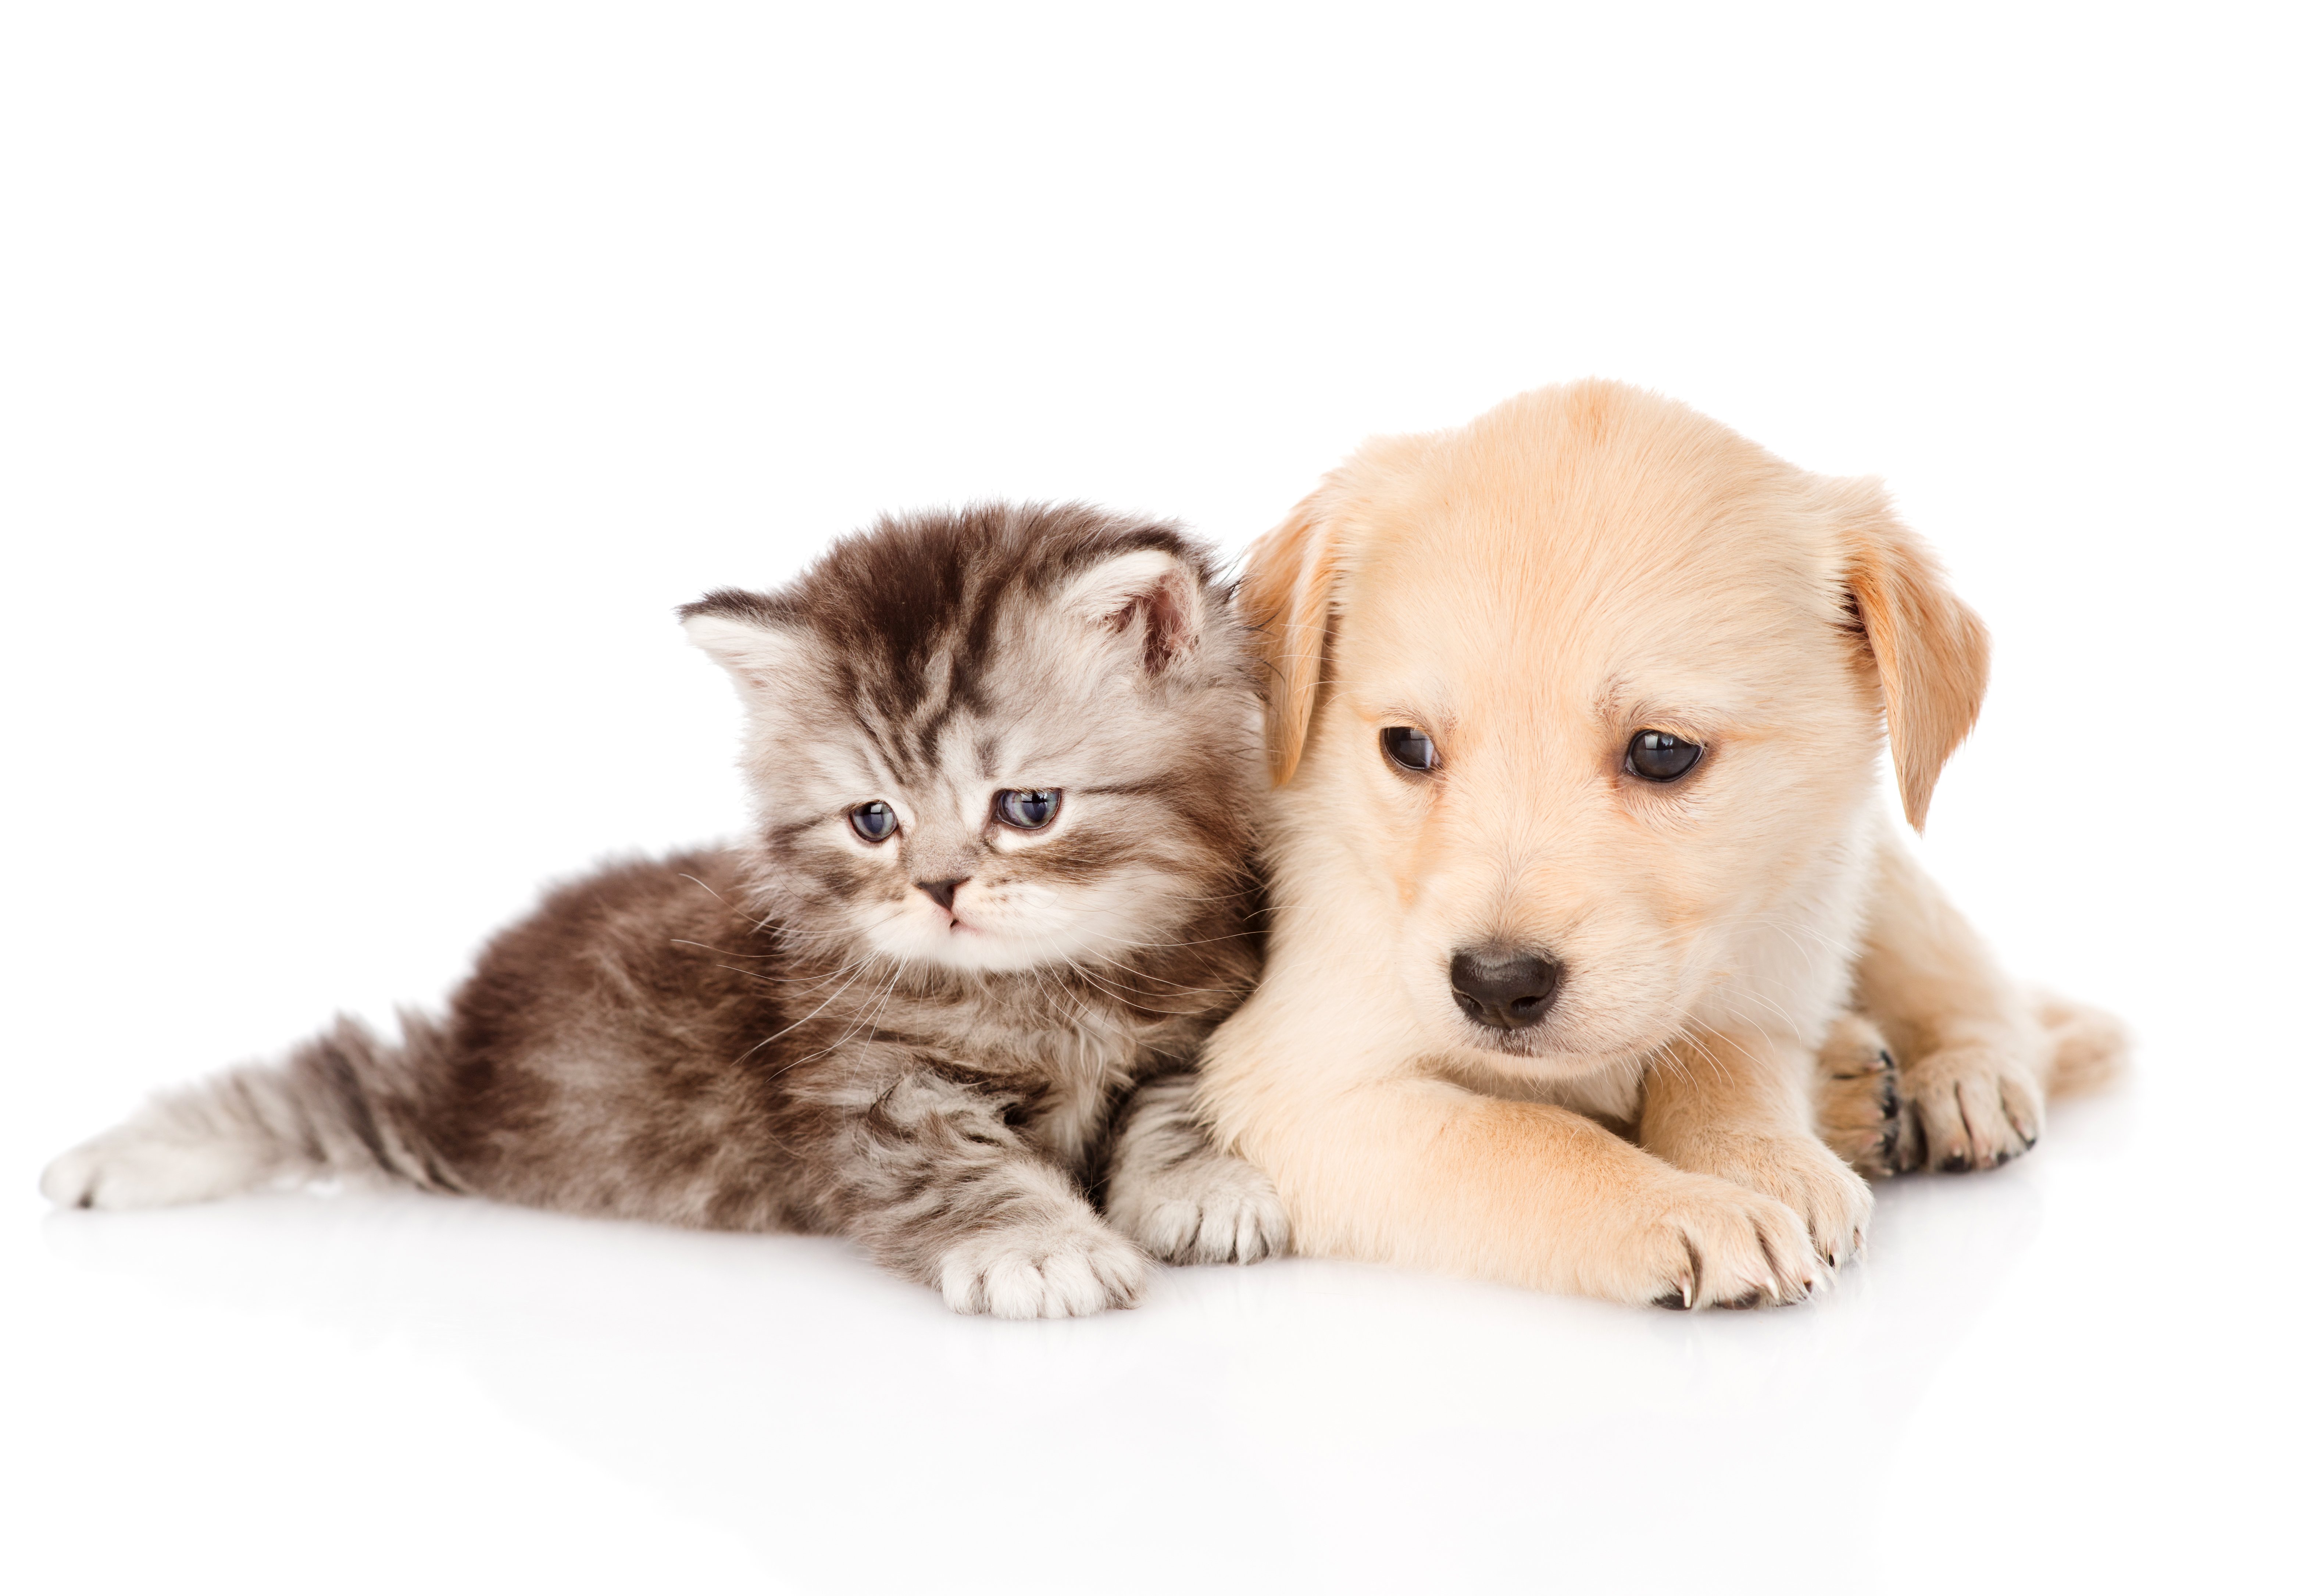 Dog And Cat Wallpaper High Quality Resolution Long